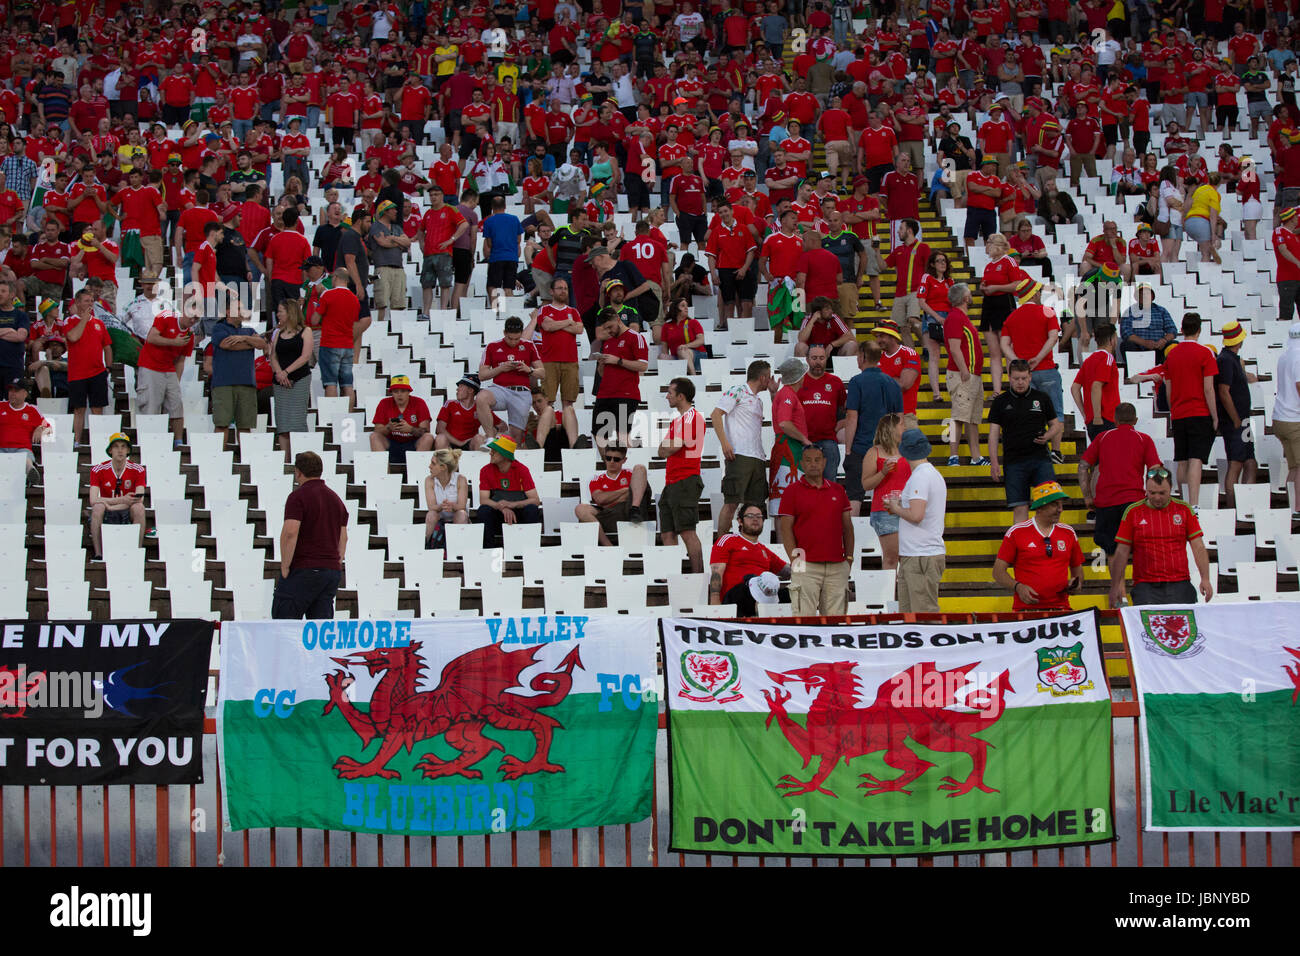 BELGRADE, SERBIA - JUNE 11, 2017: Wales fans during the 2018 FIFA World Cup Qualifier match between Serbia and Wales at Rajko Mitic Stadium on June 11 Stock Photo